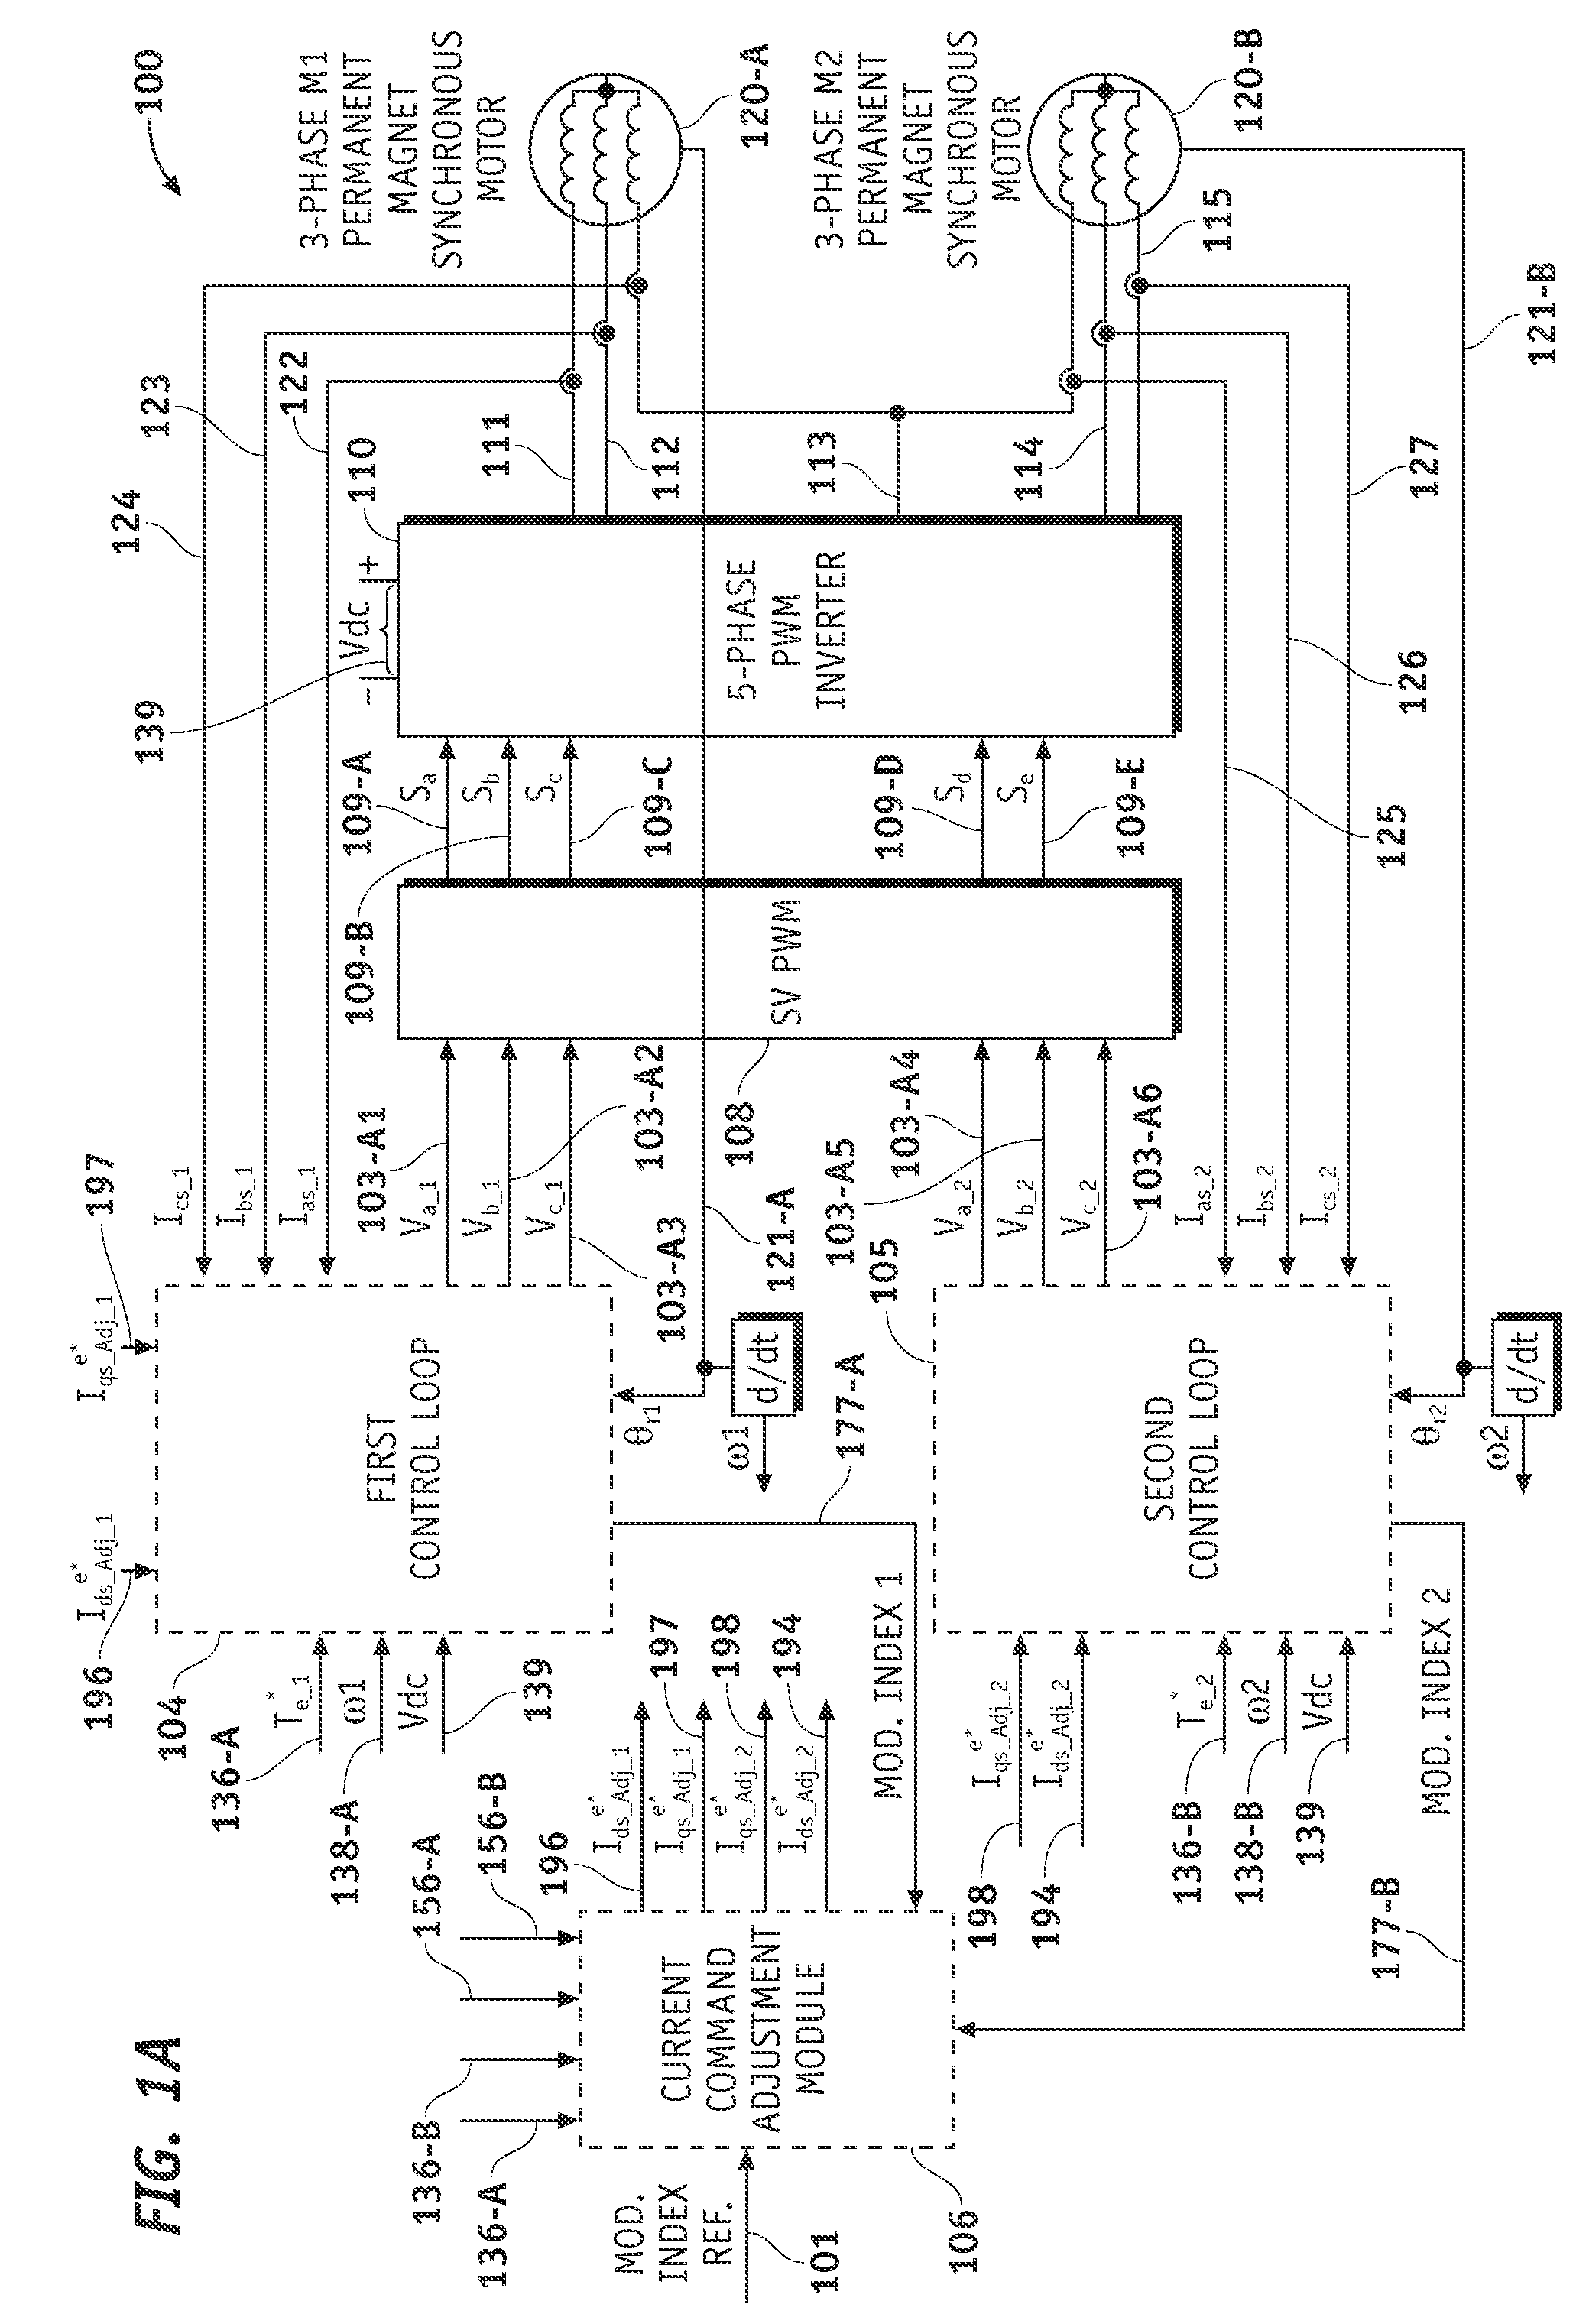 Methods, systems and apparatus for controlling operation of two alternating current (AC) machines